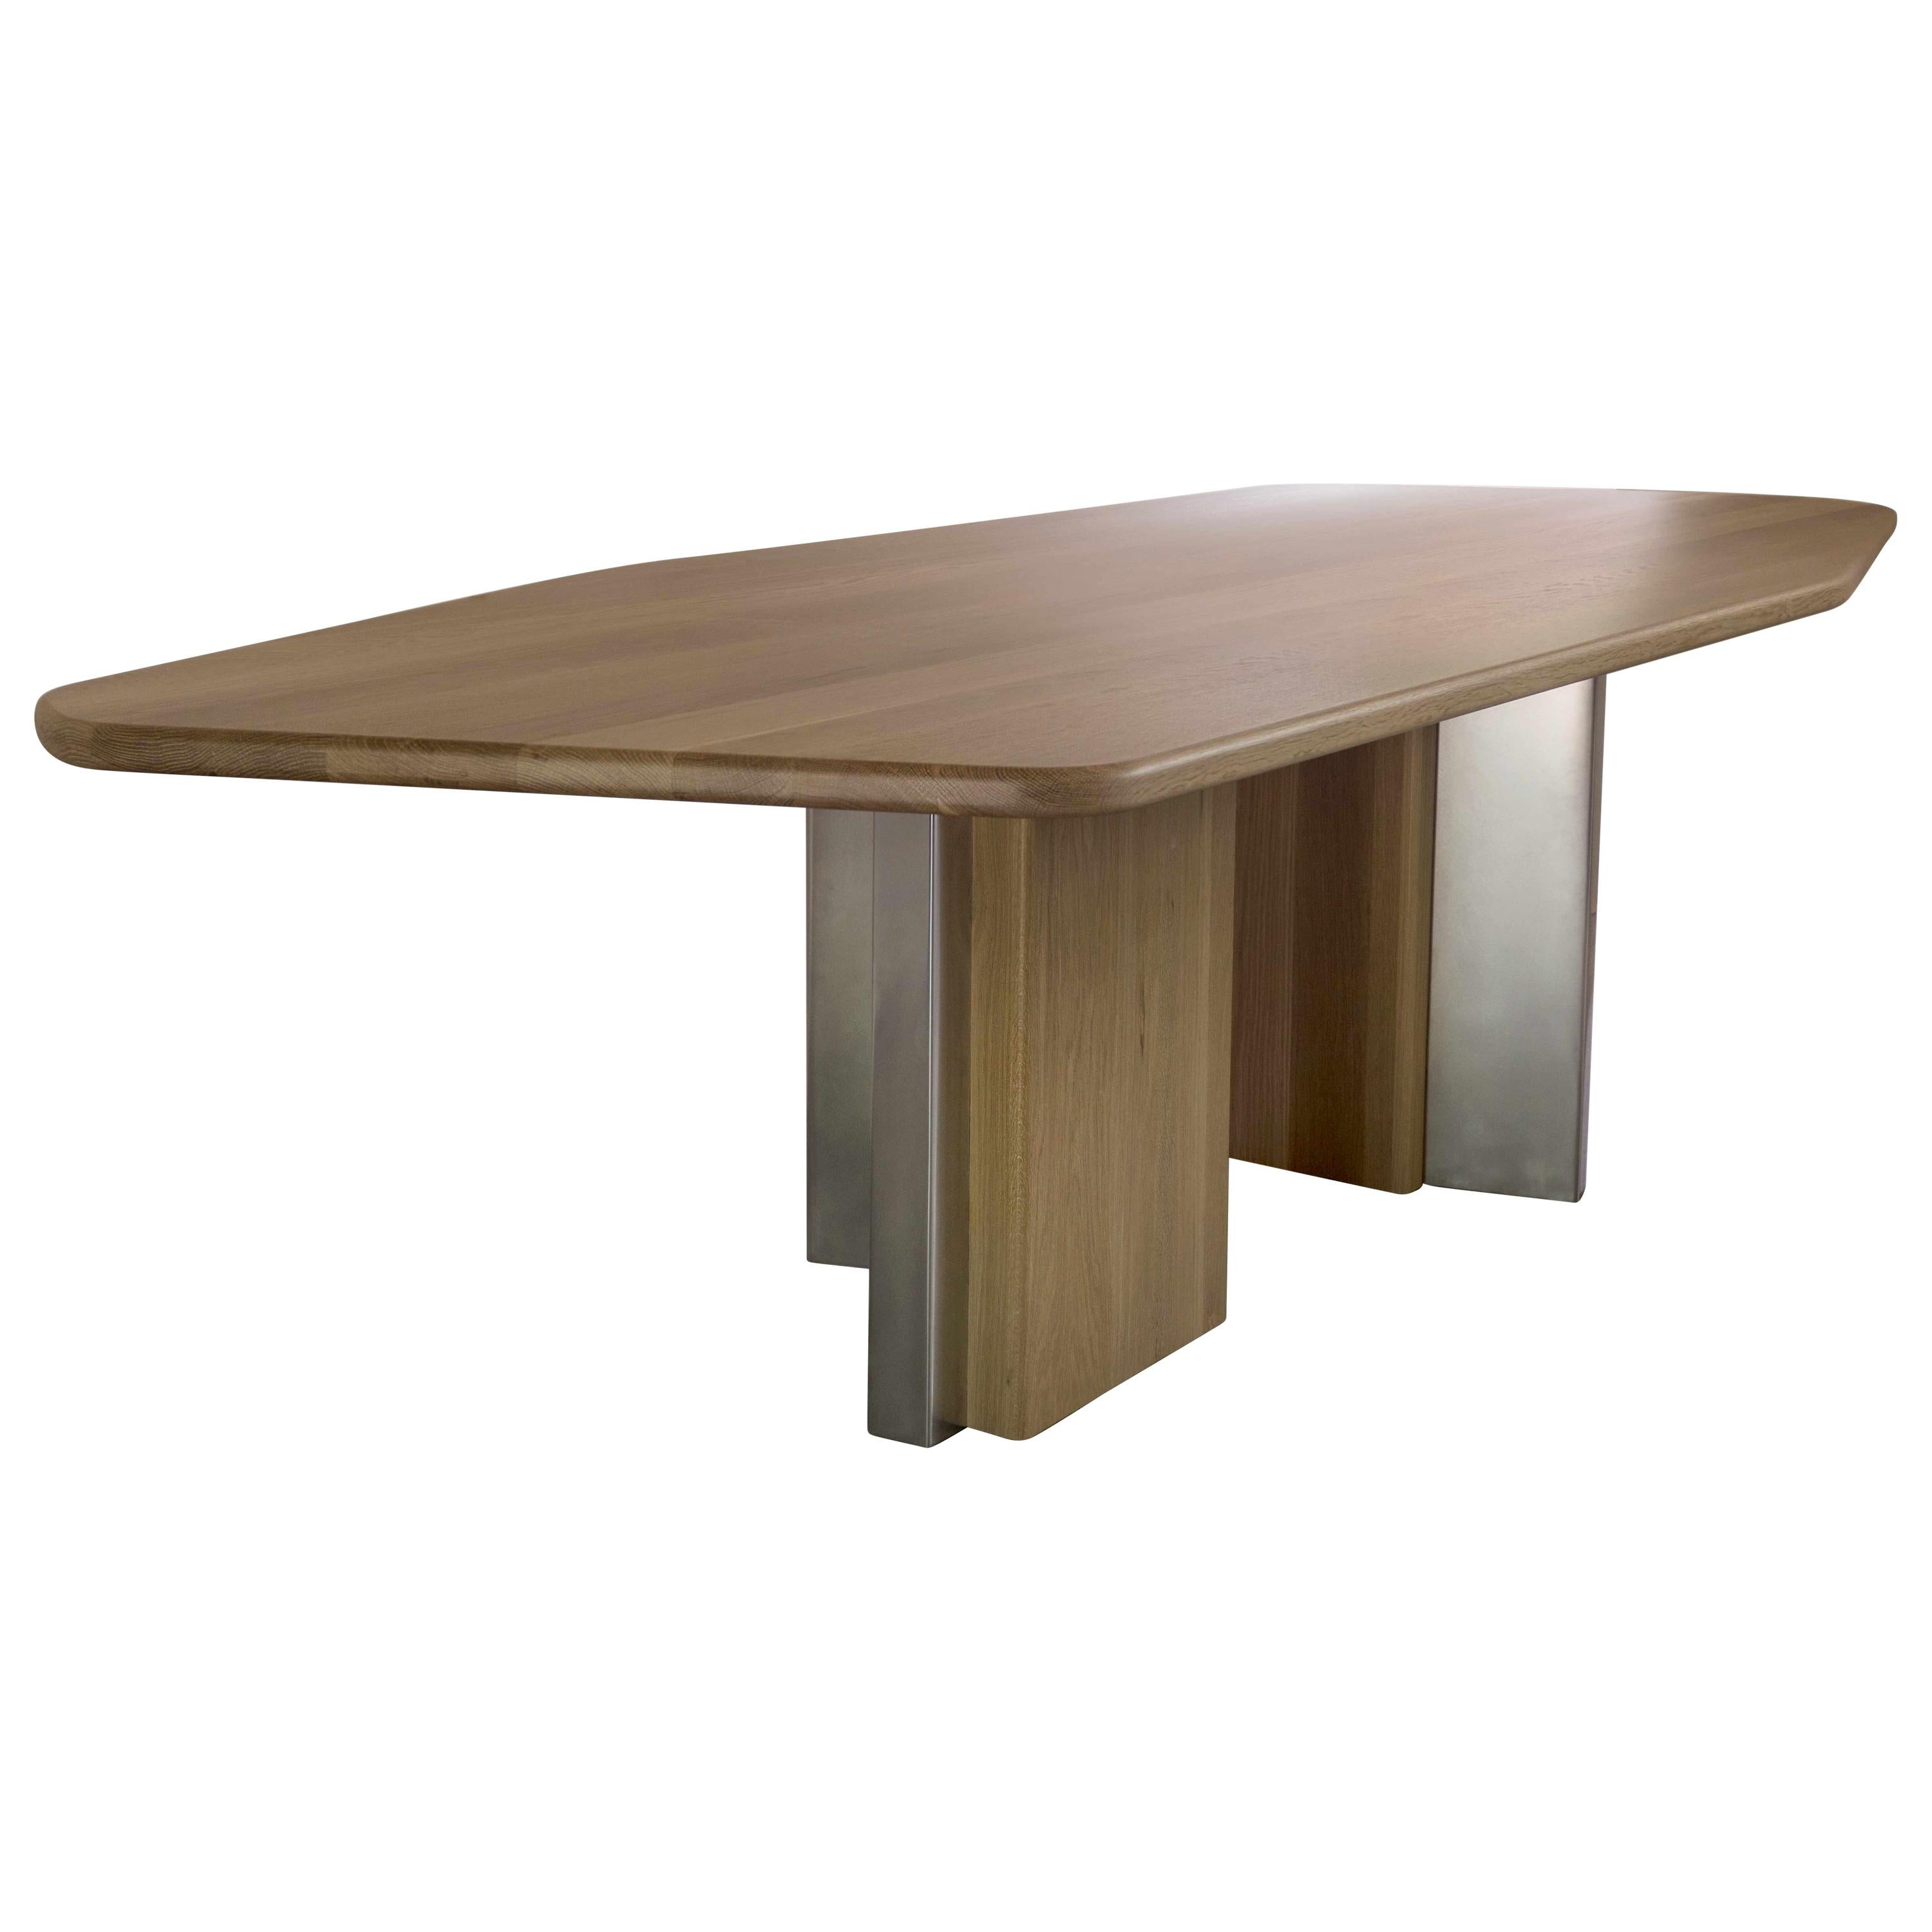 Diamond Table (105") in White Oak and Polished Aluminum by Simon Johns